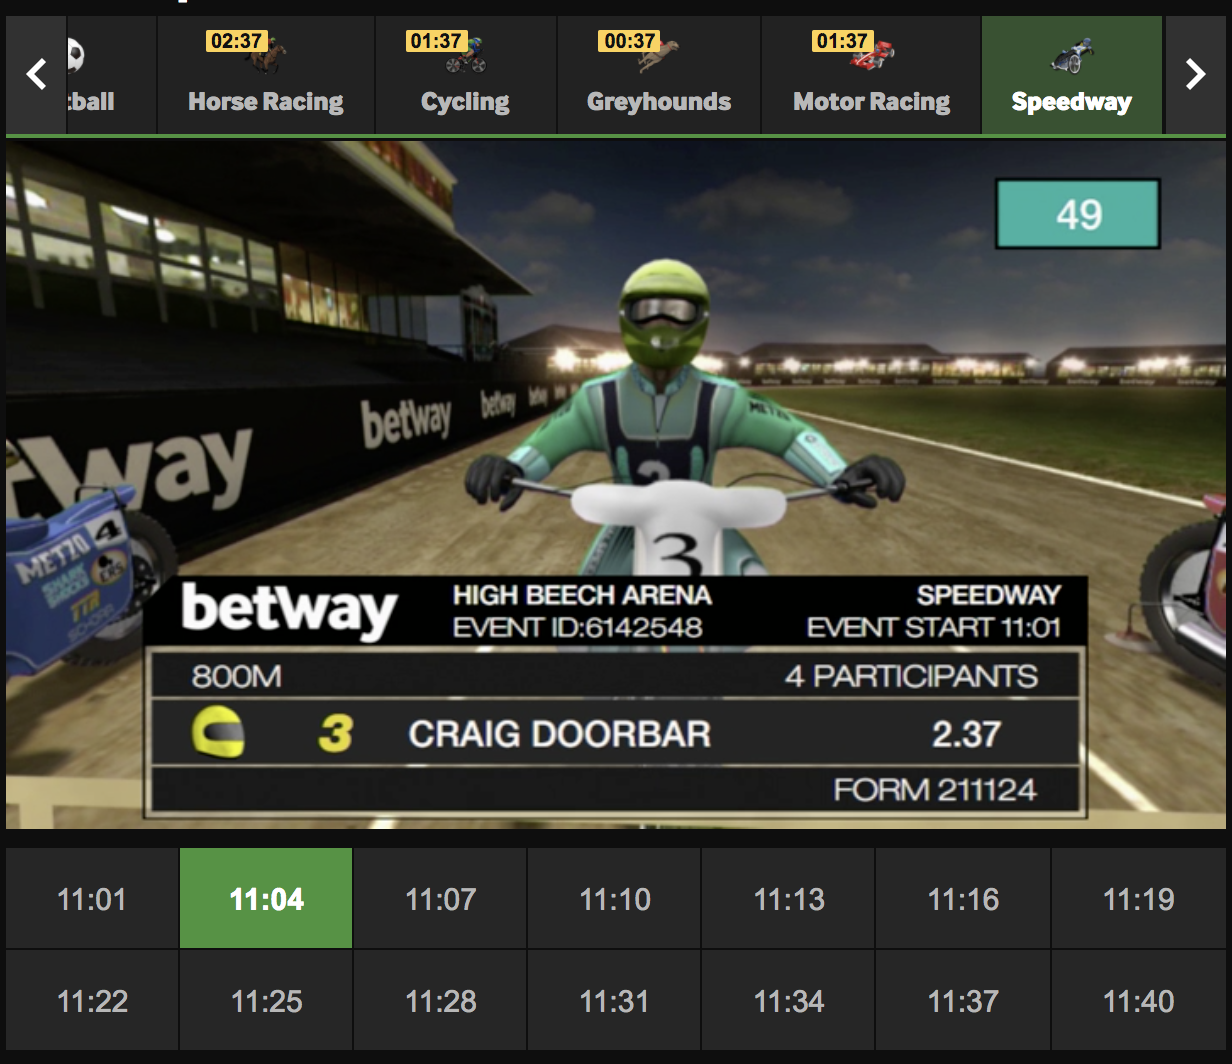 What is the Most Realistic of Betway’s Virtual Sports Services?